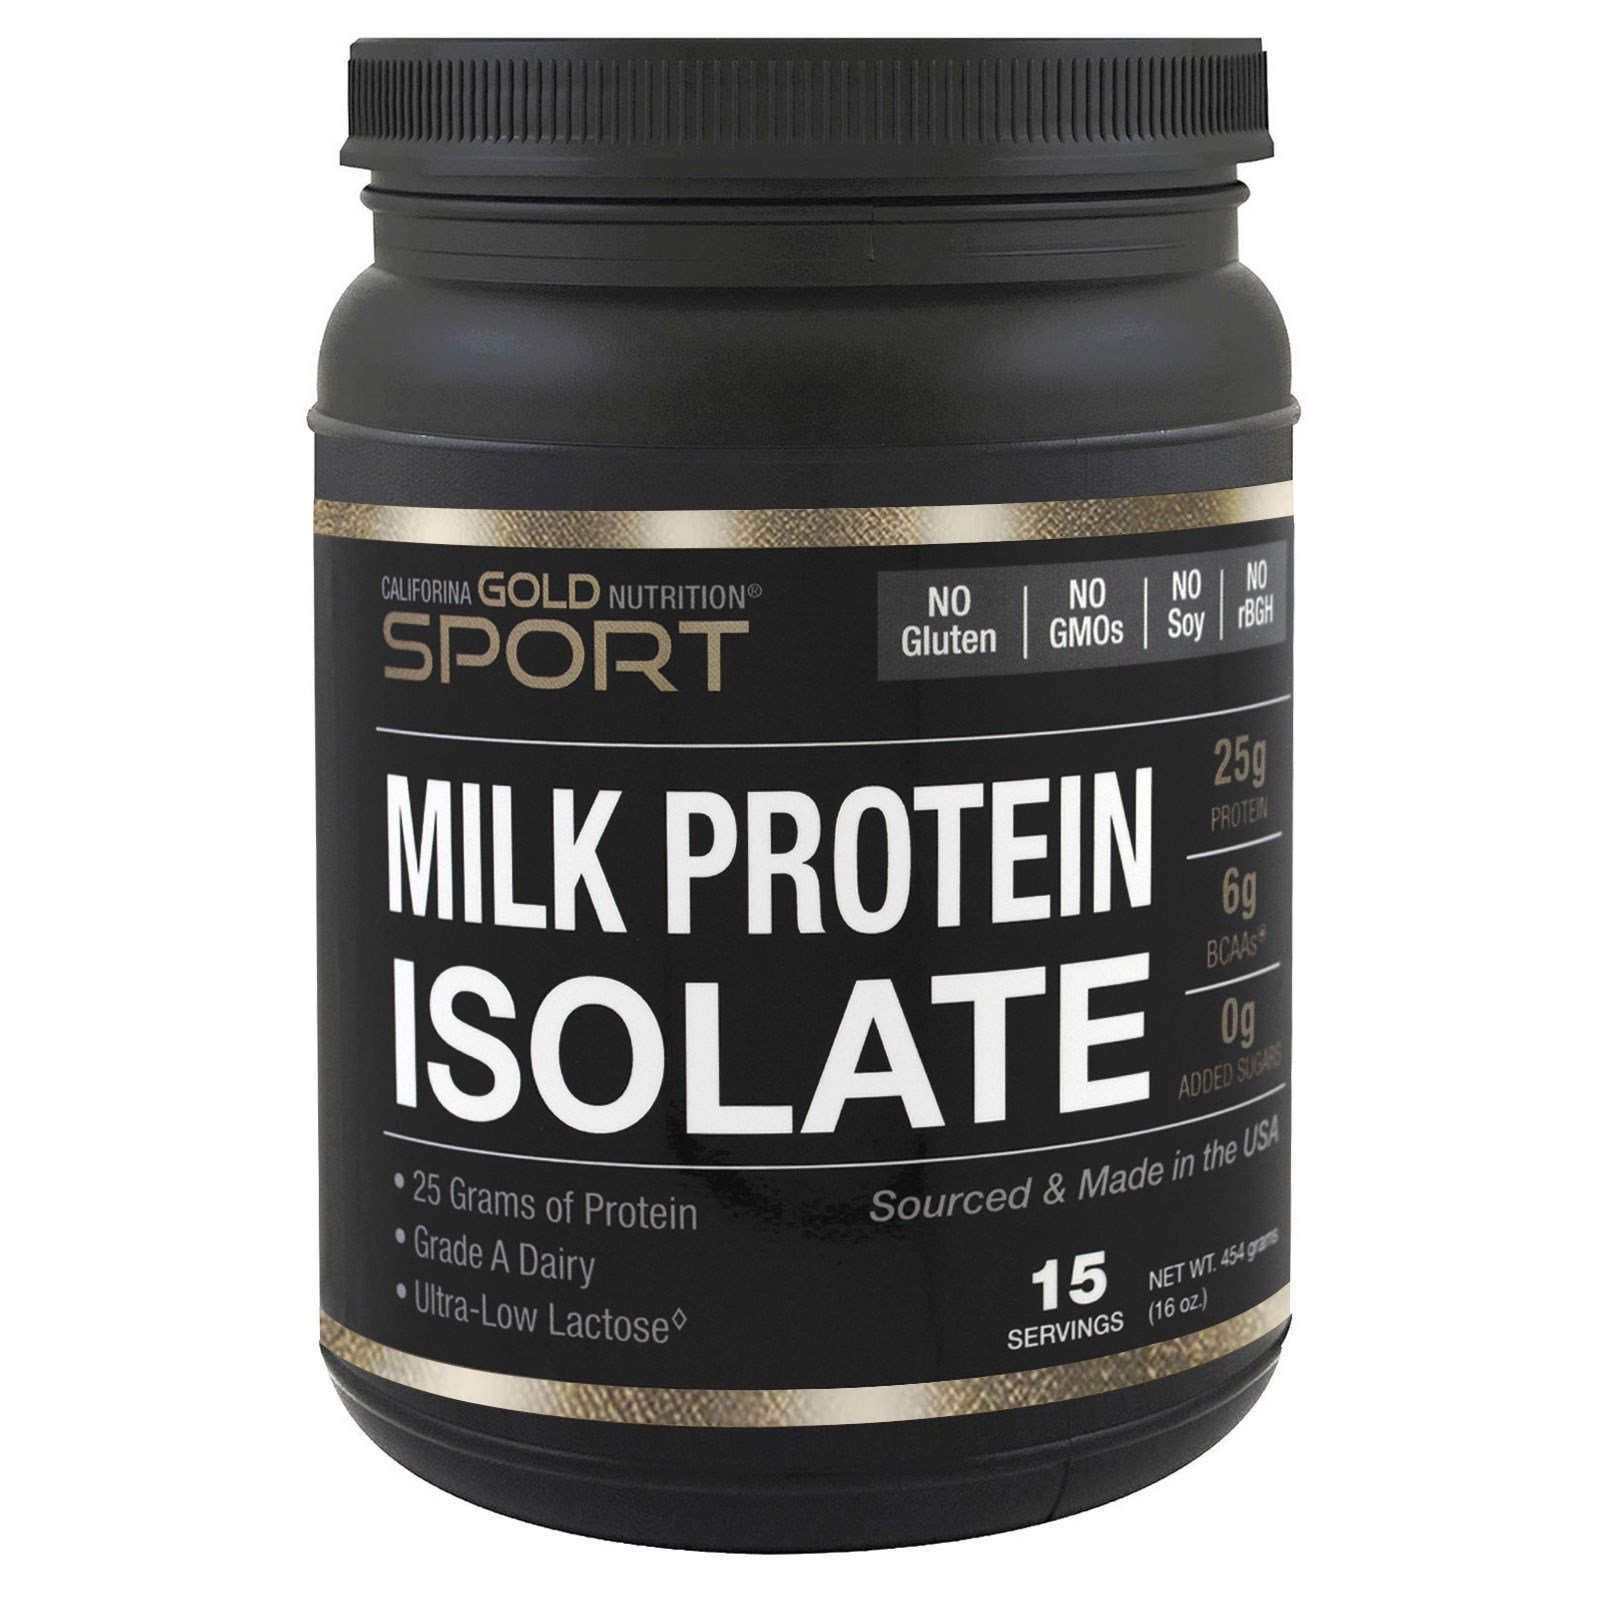 Протеин 16. California Gold Nutrition Whey Protein isolate 454 г. Изолят сывороточного протеина California Gold Nutrition Sport. California Gold Nutrition, Whey Protein isolate, 907г. Казеиновый протеин «Gold Standard 100% Casein».